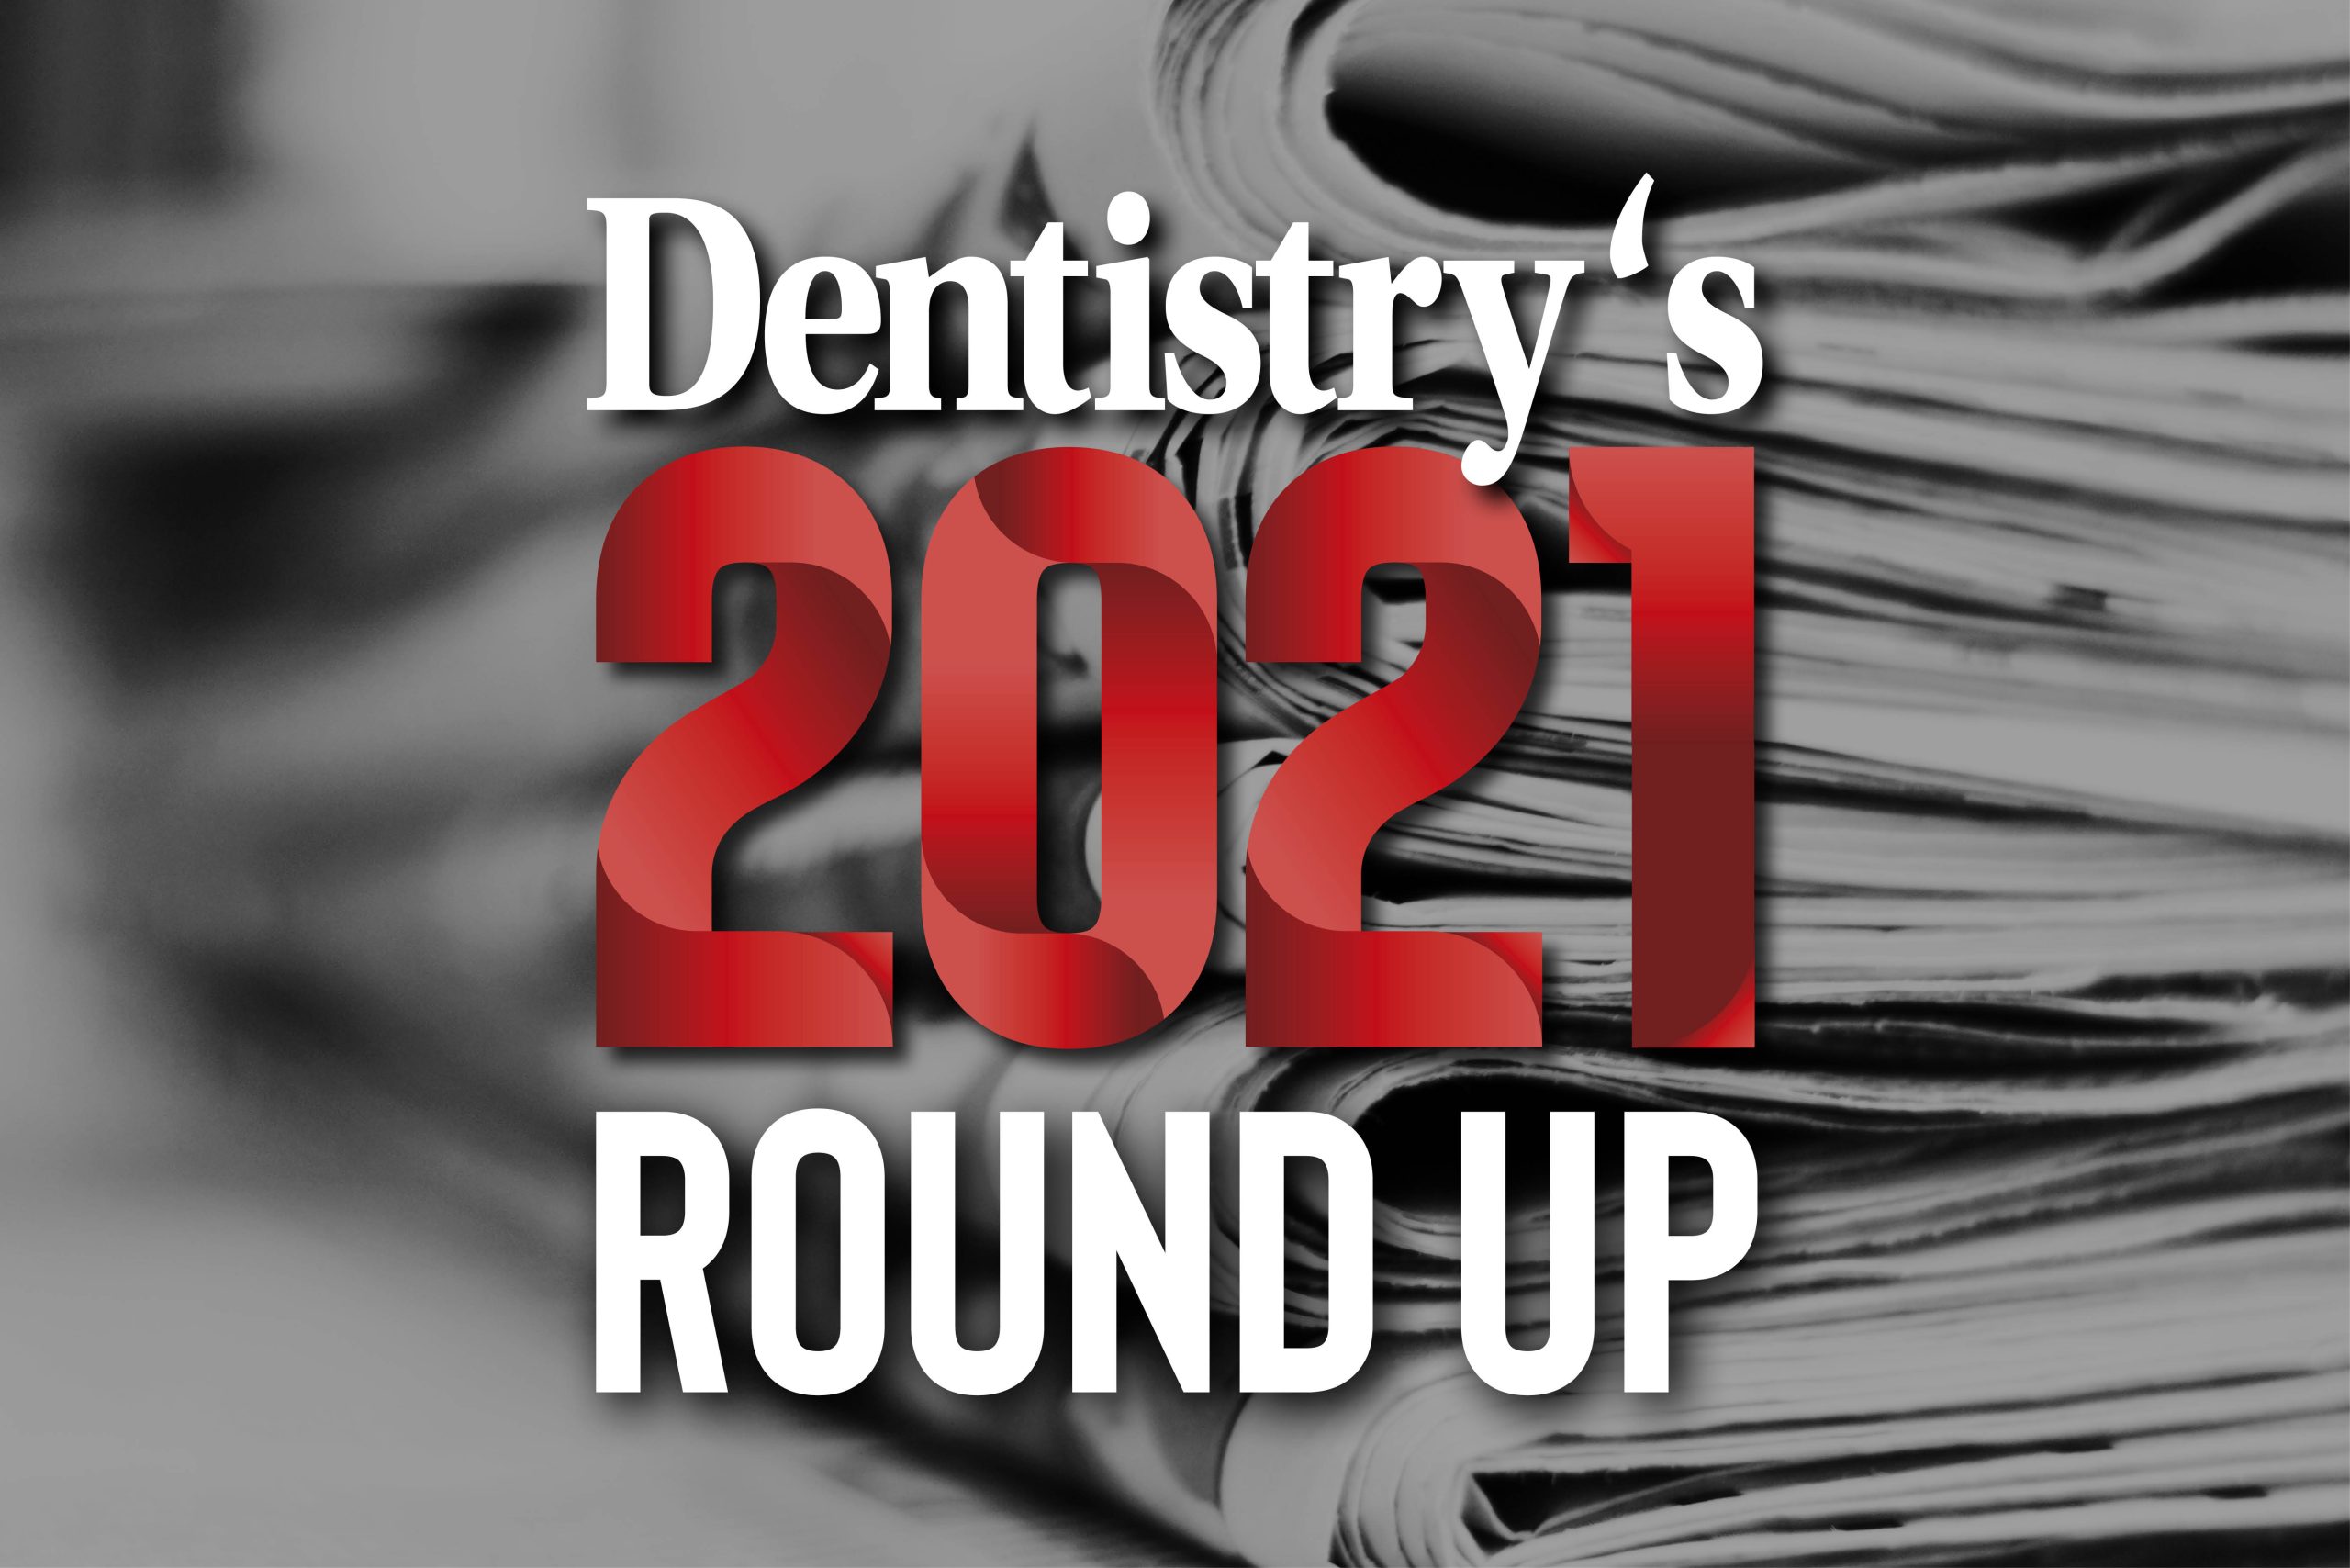 Dentistry's 2021 round up